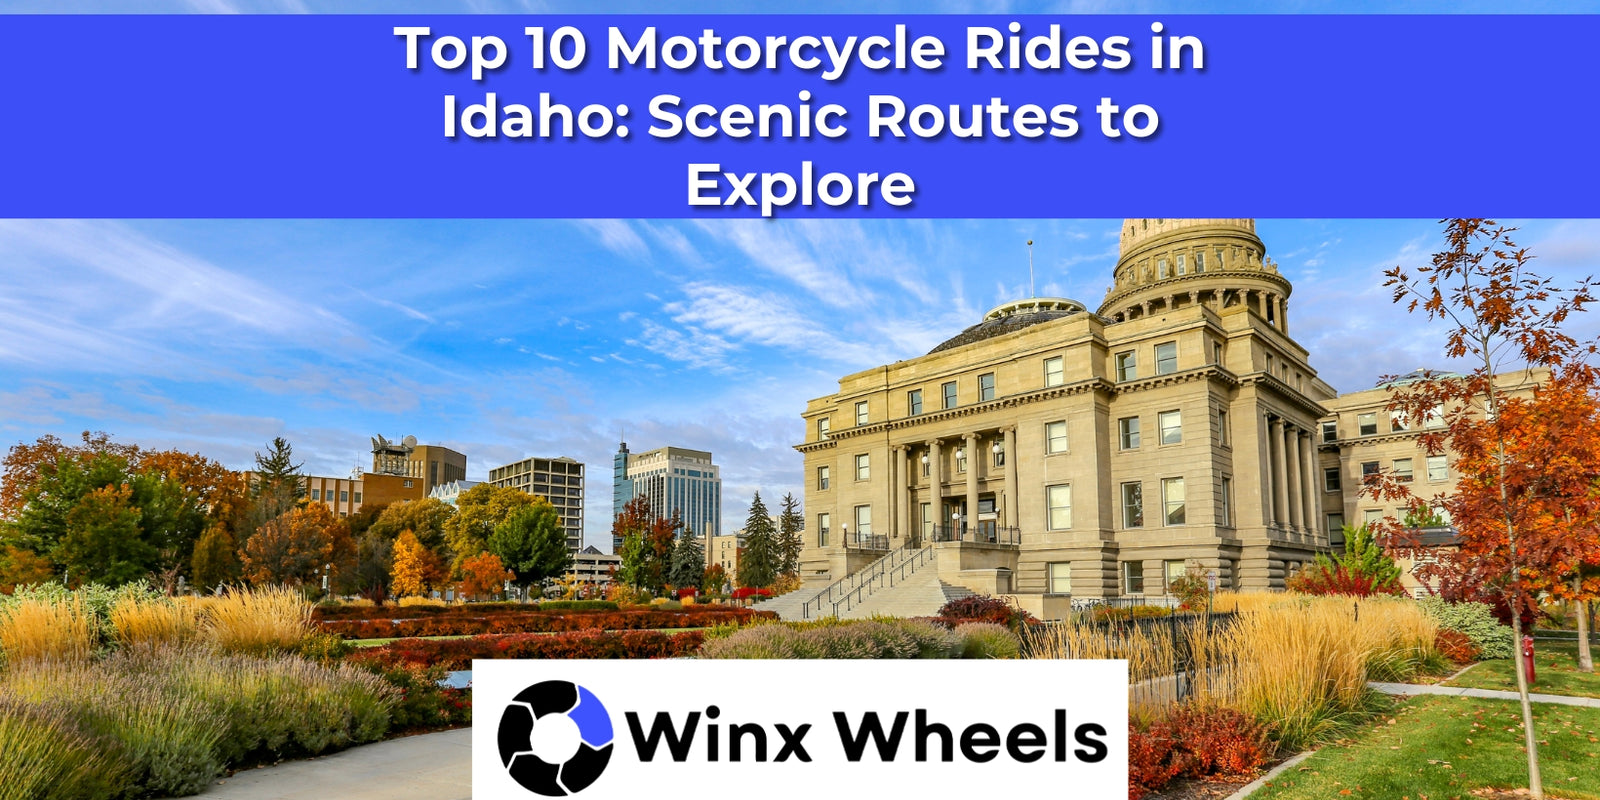 Top 10 Motorcycle Rides in Idaho: Scenic Routes to Explore